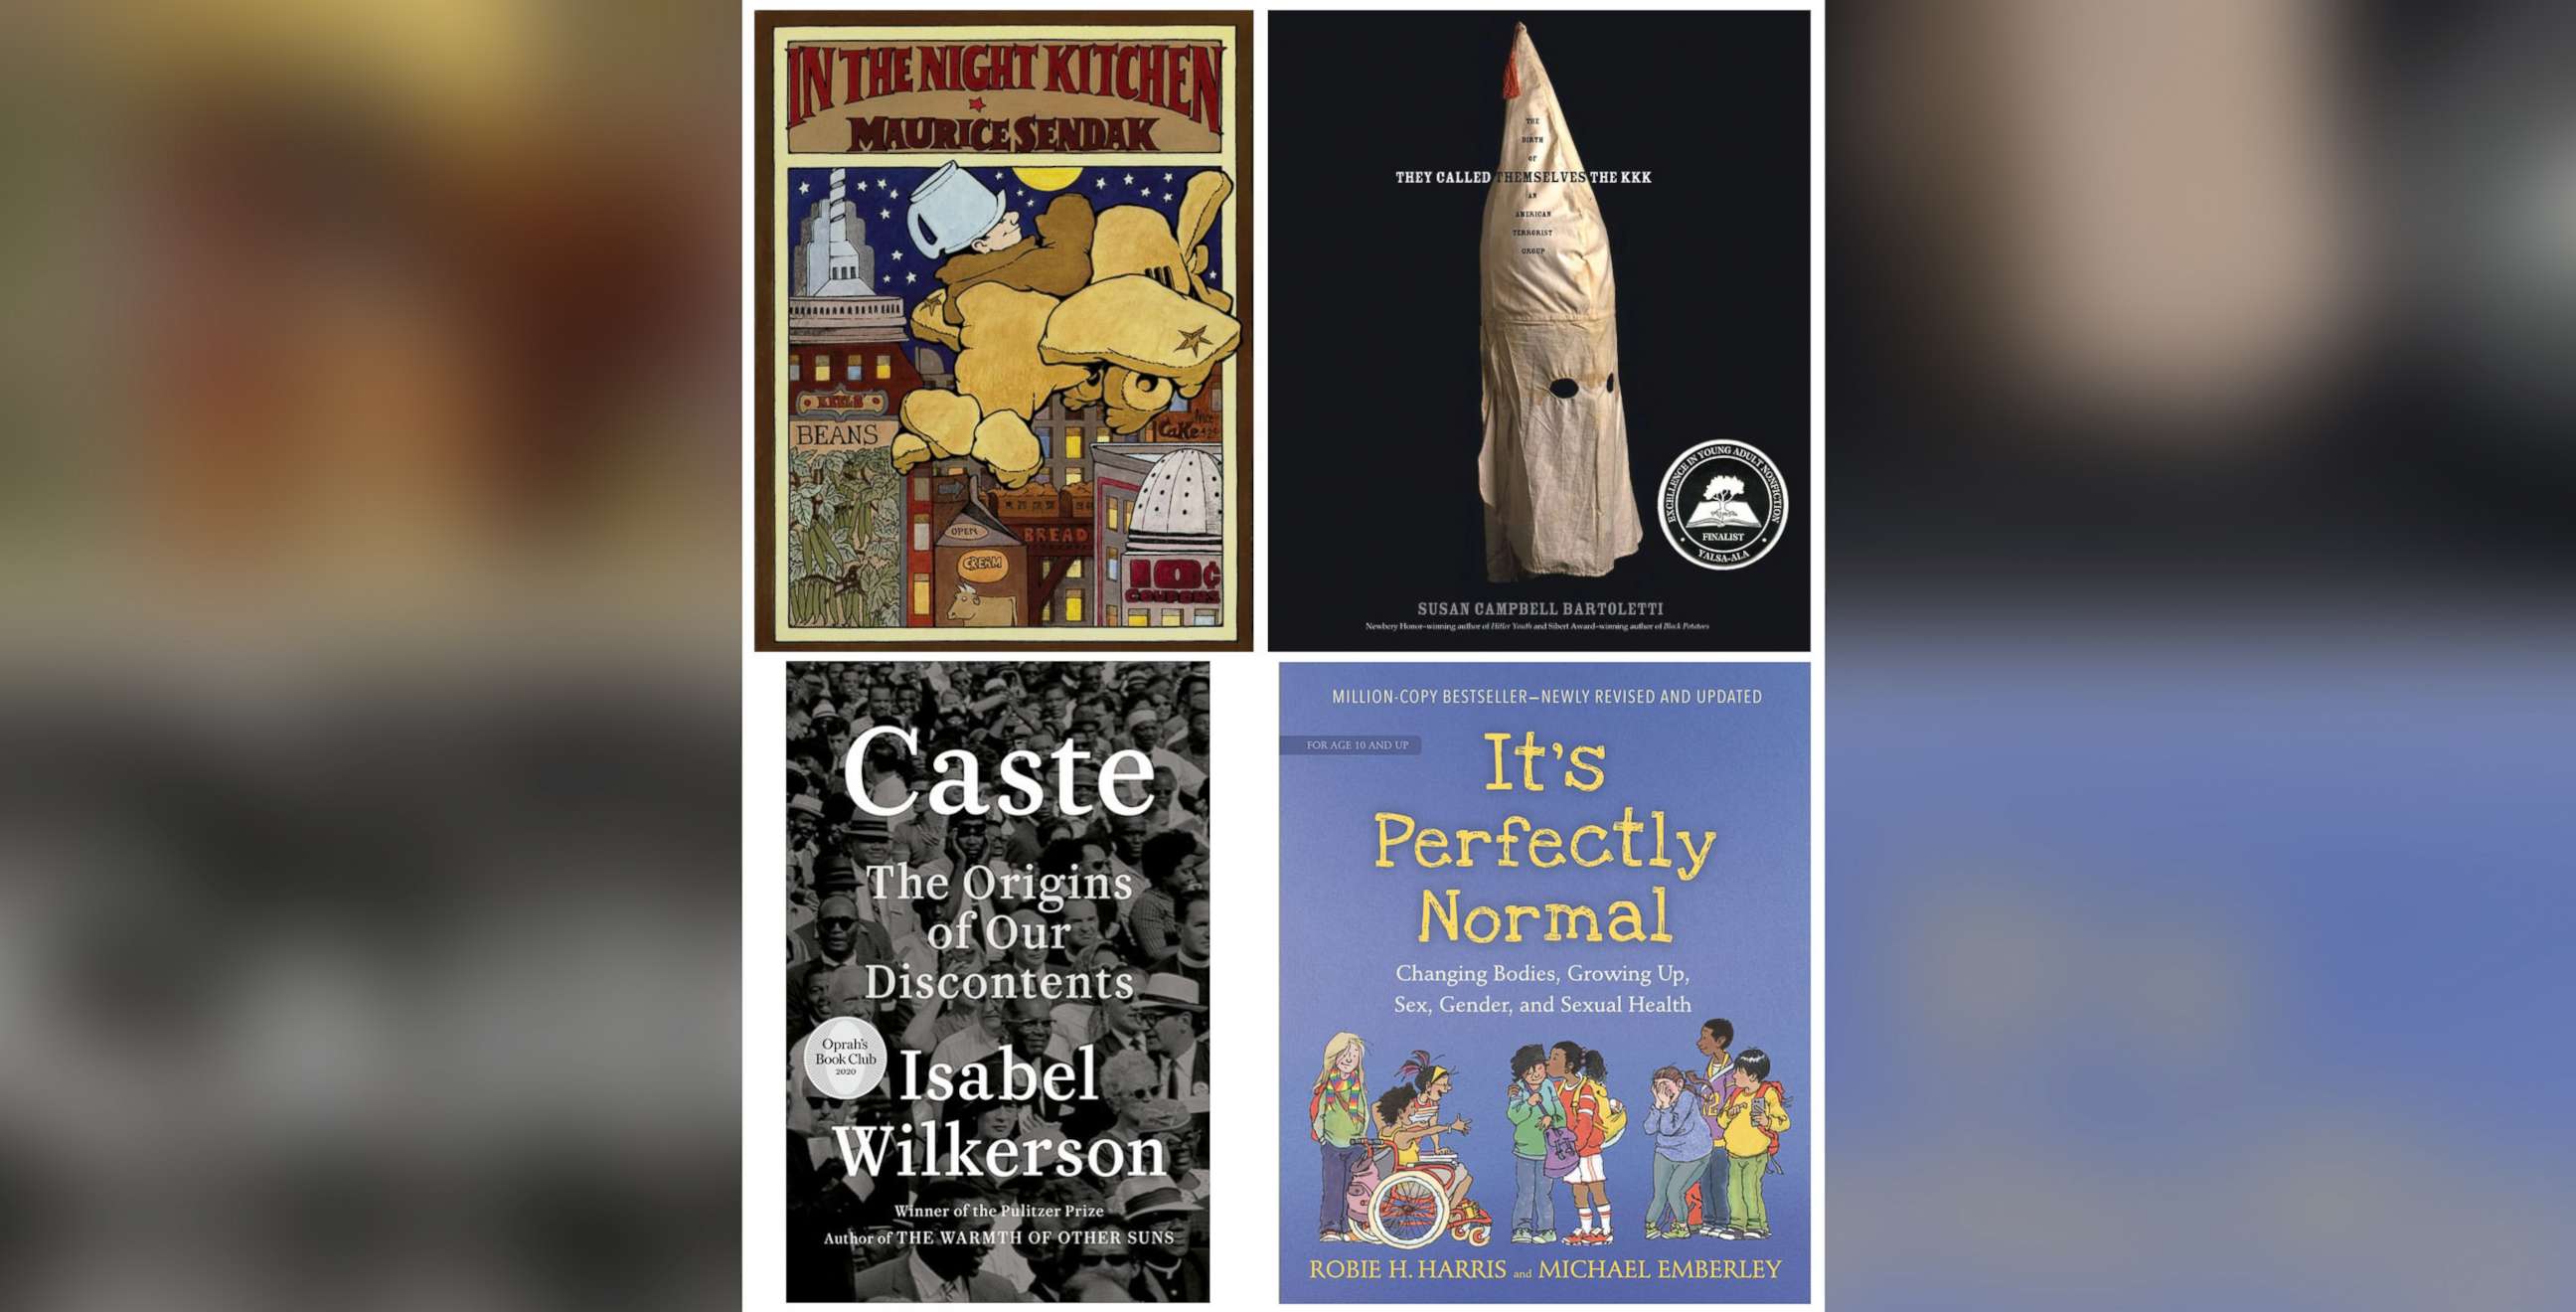 PHOTO: Banned books in Llano county, Texas include "In the Night Kitchen" by Maurice Sendak, "They Called Themselves the K.K.K... by Susan Campbell Bartoletti, "Caste... by Isabel Wilkerson and "It's Perfectly Normal: Changing Bodies... by Robie H. Harris